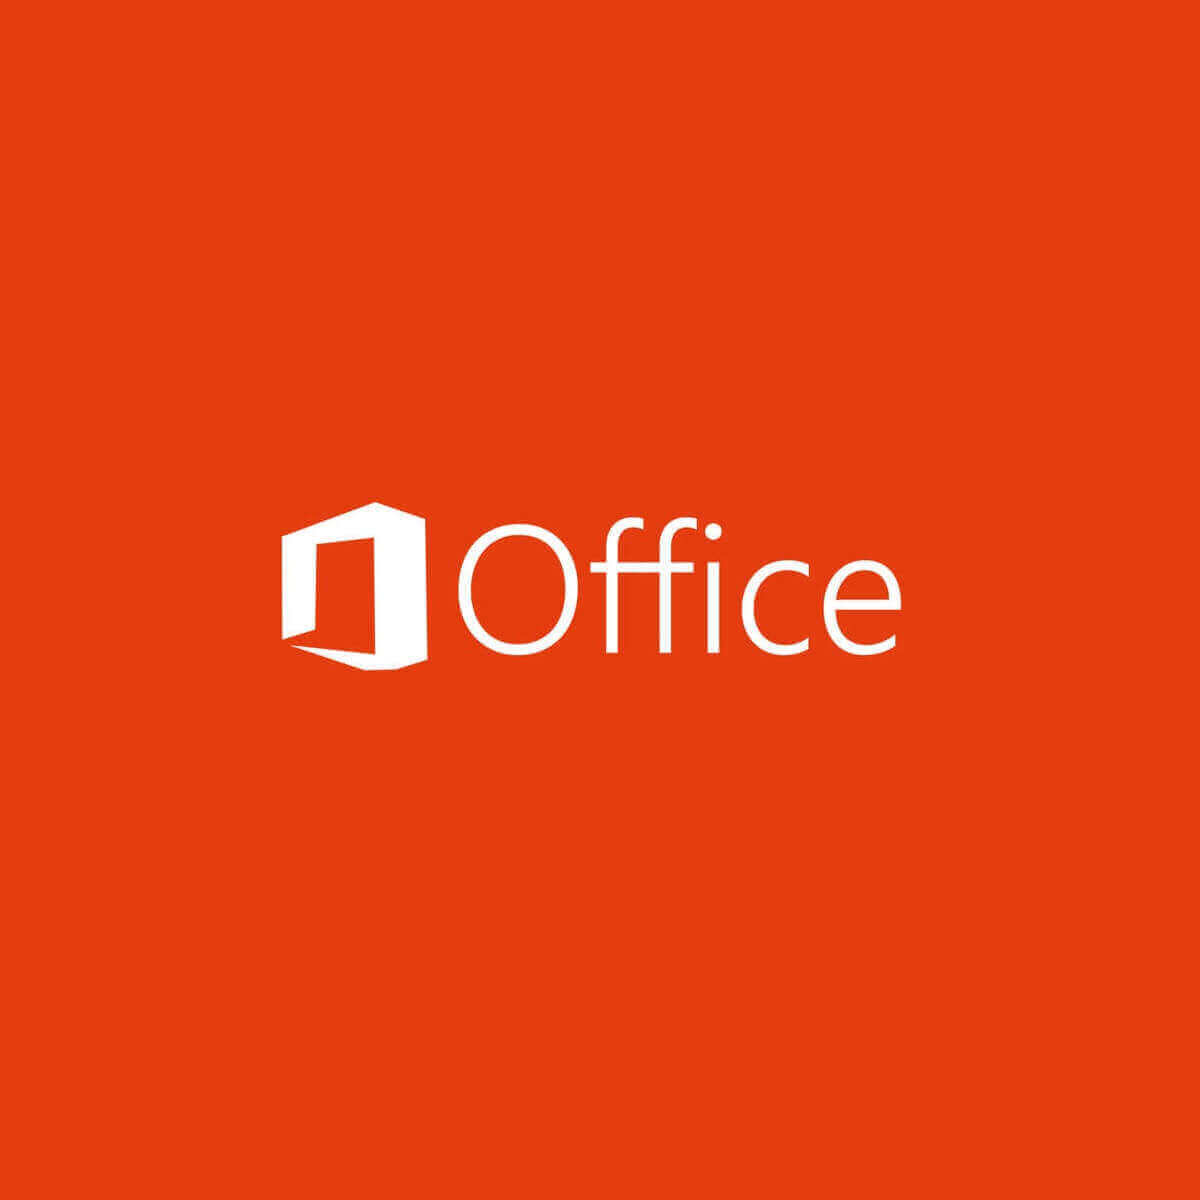 microsoft office 2013download